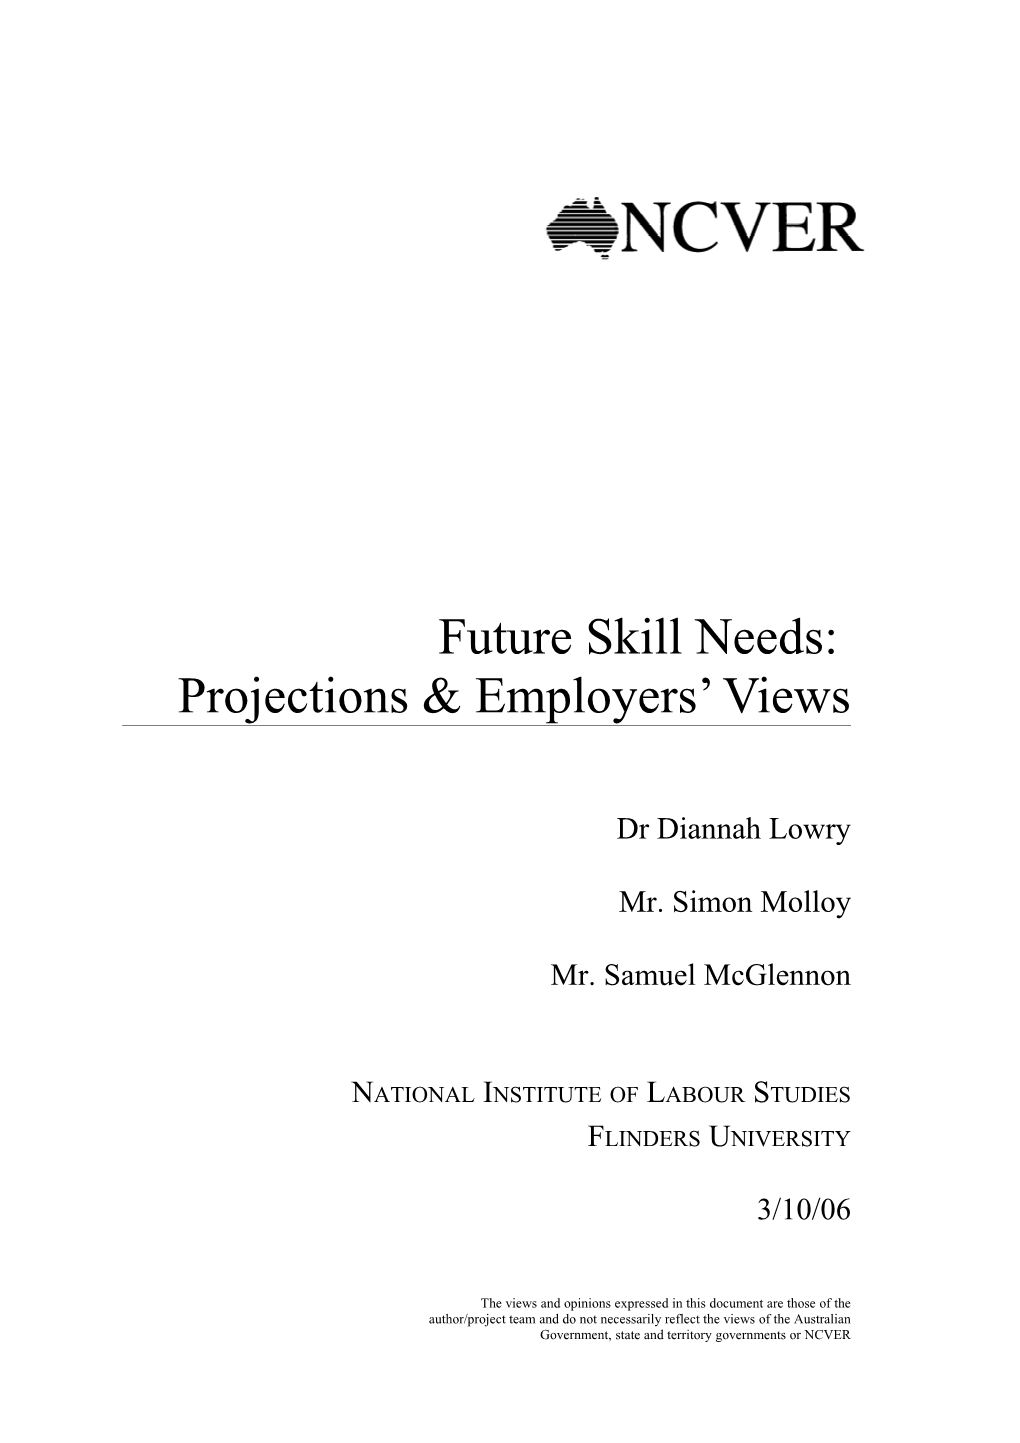 Future Skill Needs: Projections & Employers Views